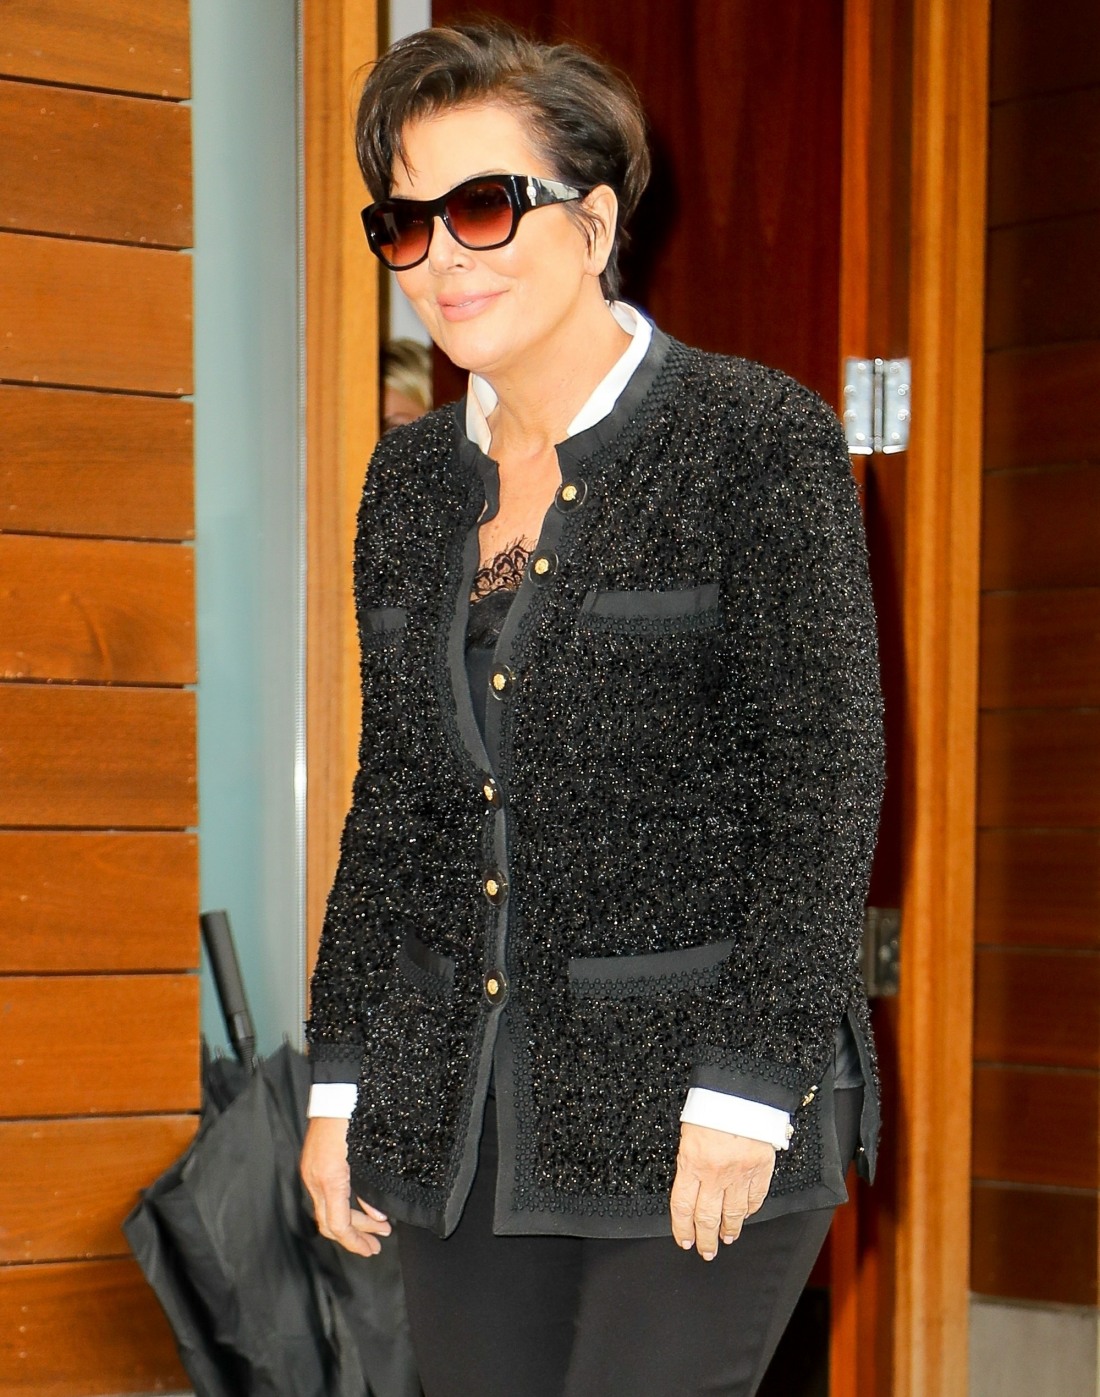 Kris Jenner is all smiles after signing the new 'KUWTK' deal